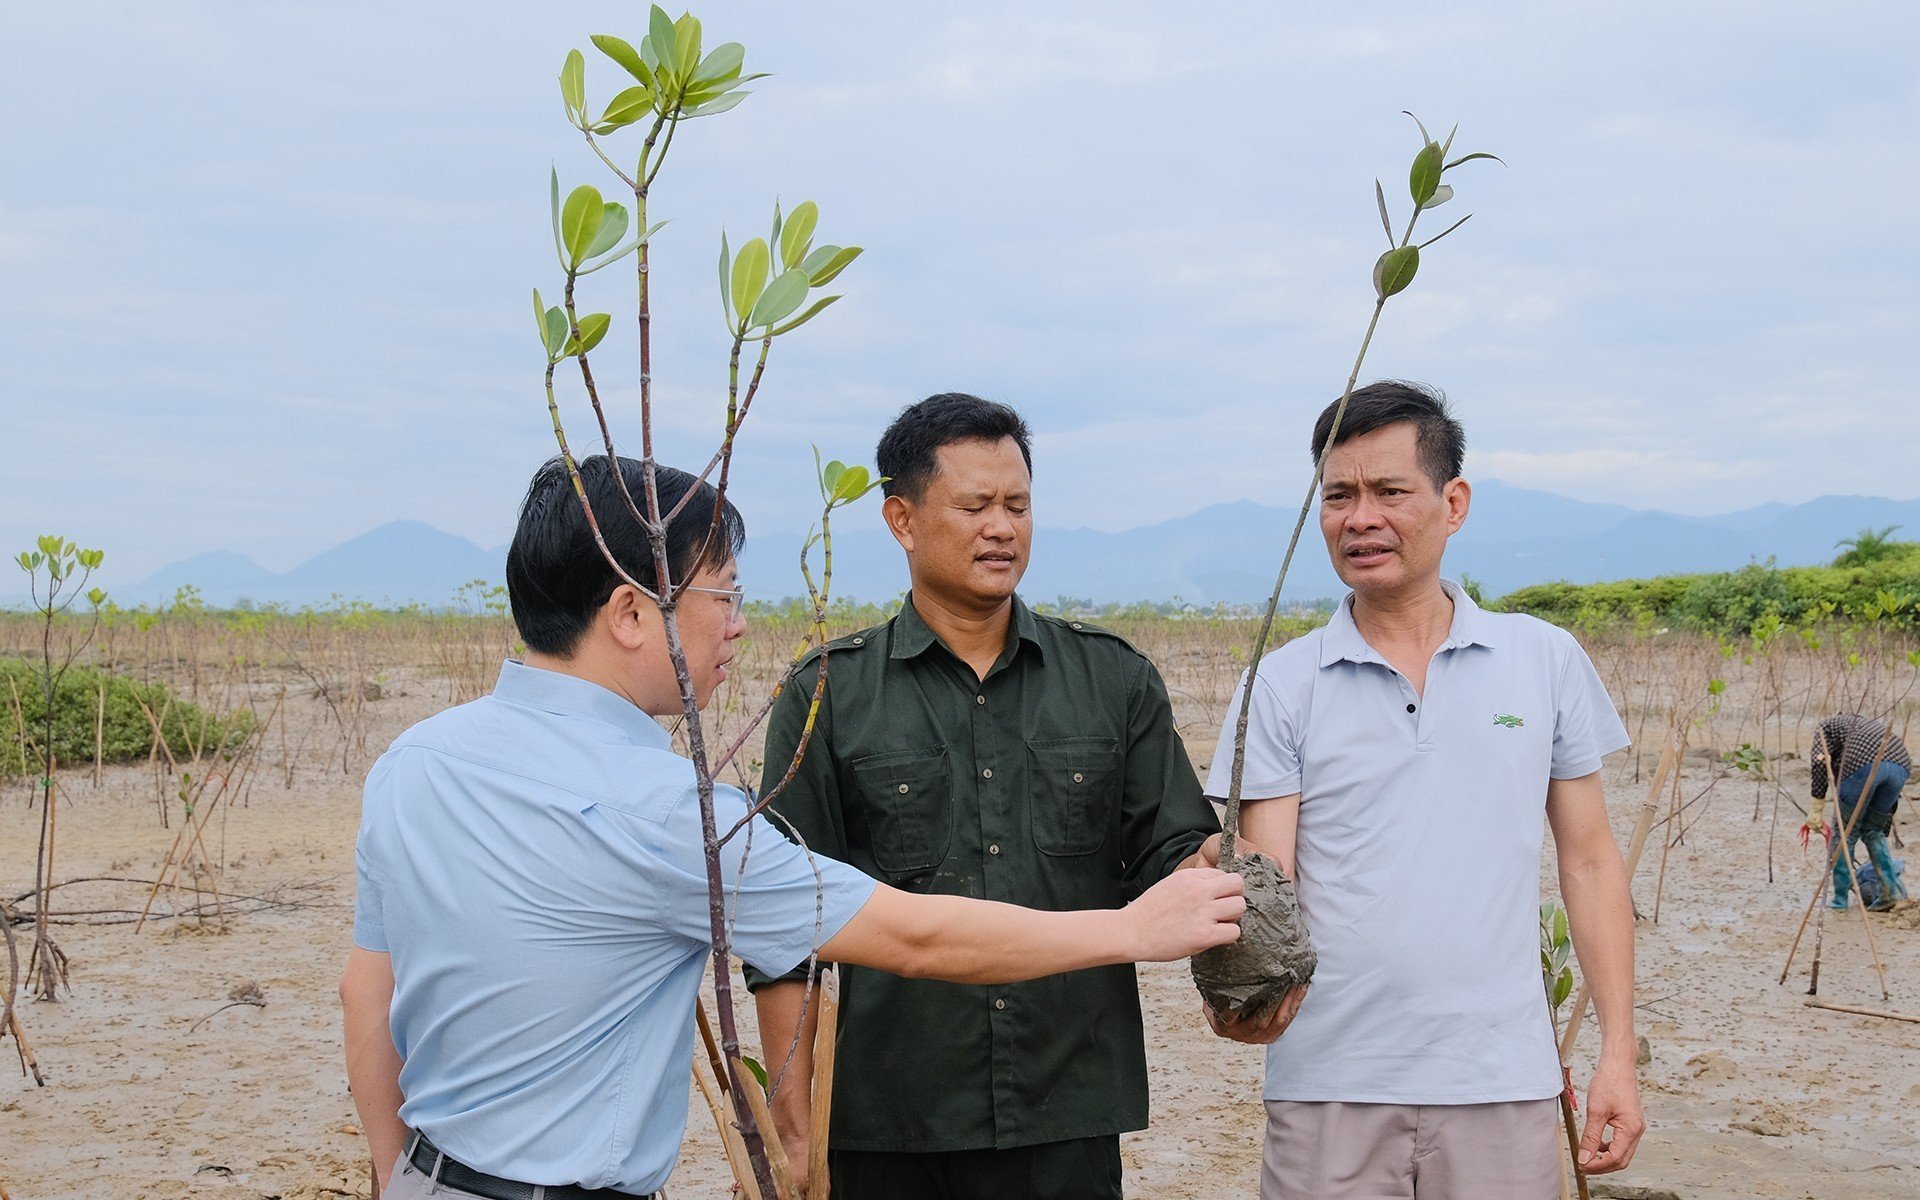 Mr. Pham Hong Vich, Deputy Head of the Forestry CPO Committee and Director of the FMCR Project, inspecting the progress of mangrove reforestation in Quang Ninh province. Photo: Bao Thang.